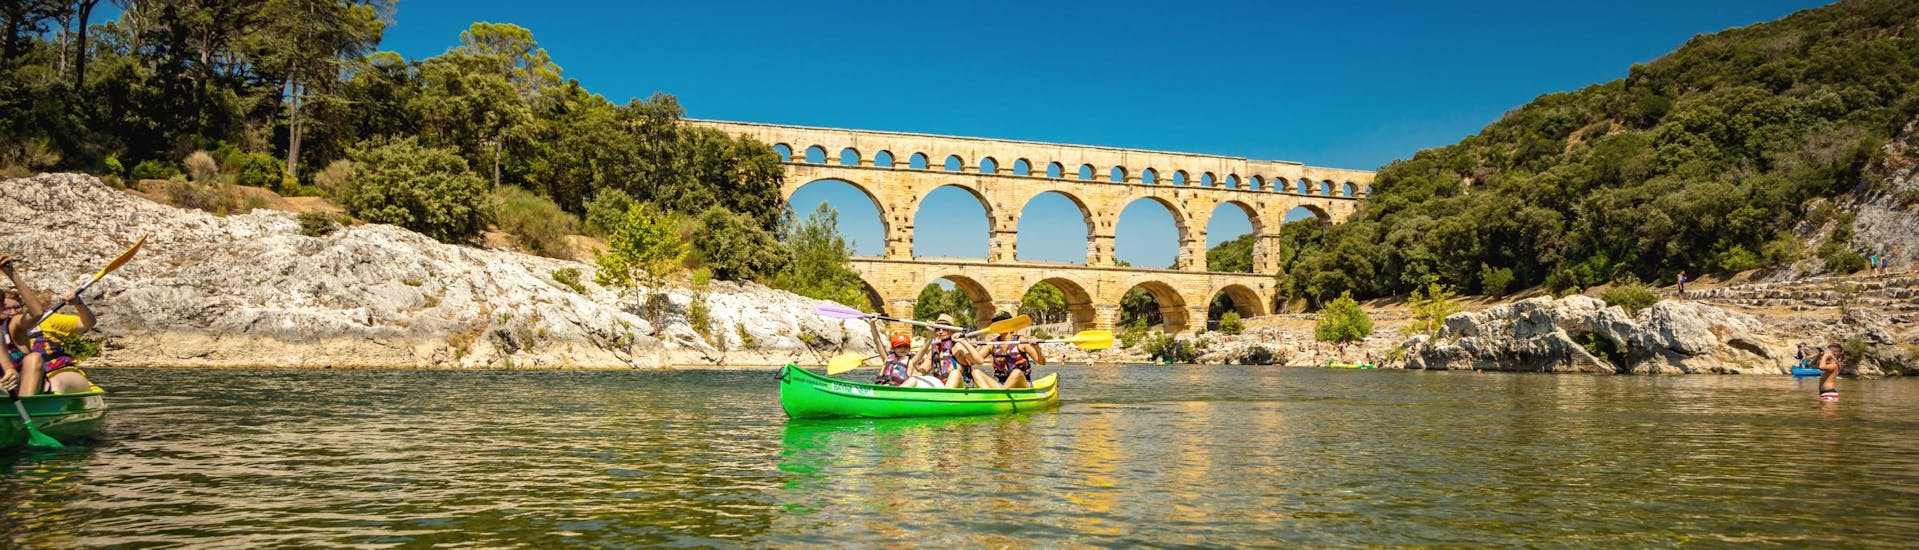 Thanks to Kayak Vert, a family is spending a good day paddling on the Gardon with the Pont du Gard in the background, one of the most popular canoeing destinations in France.